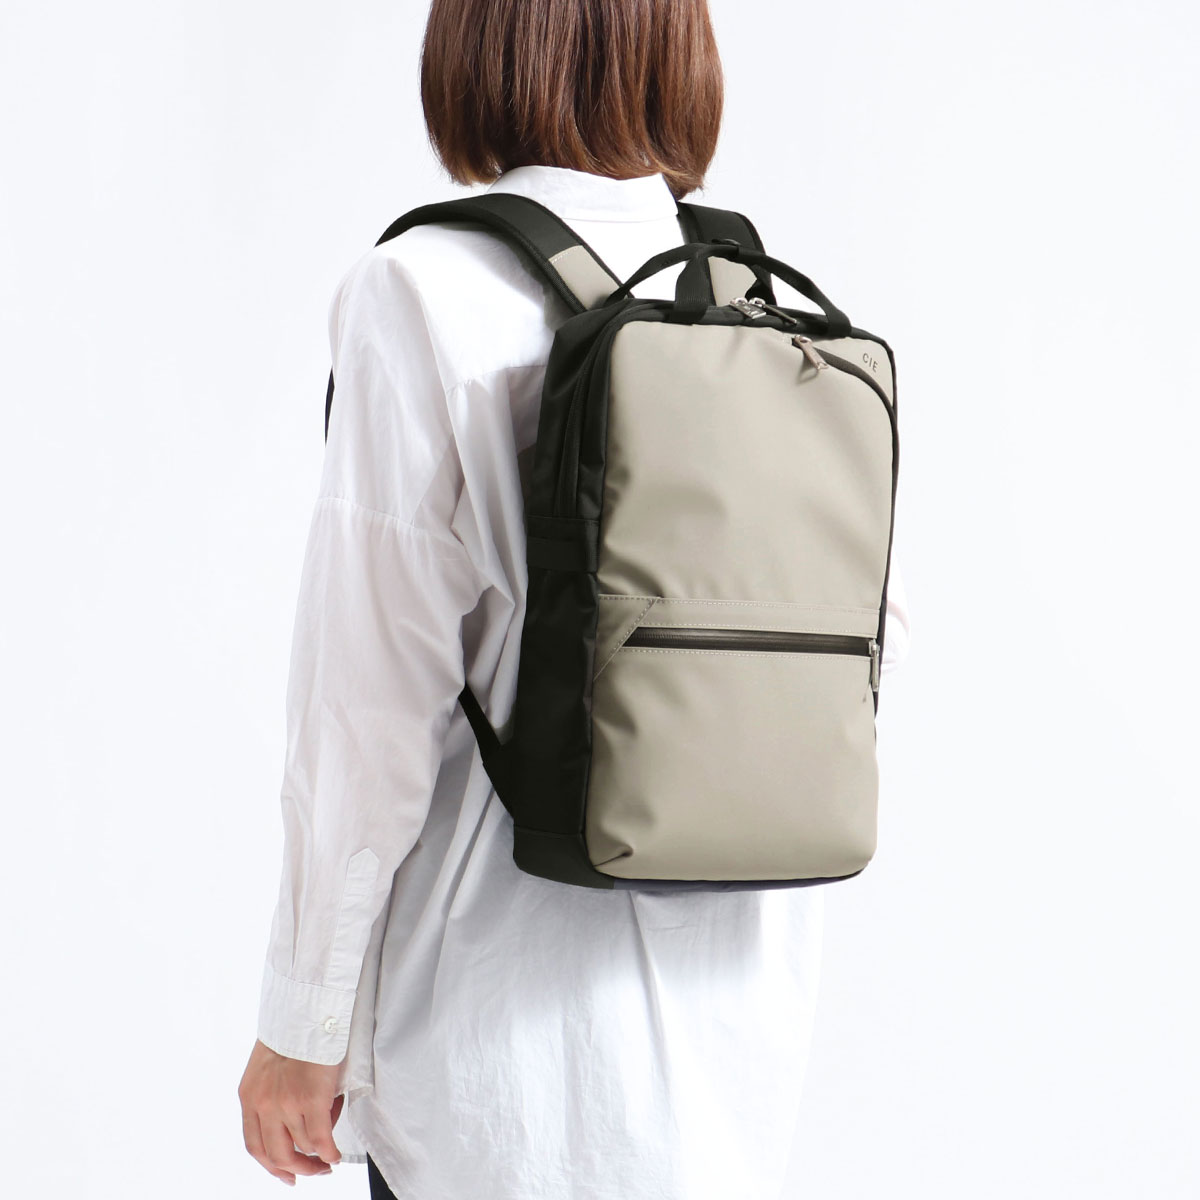 WEIGHT650g[シー]CIE VARIOUS 2WAY BACKPACK リュック - リュック